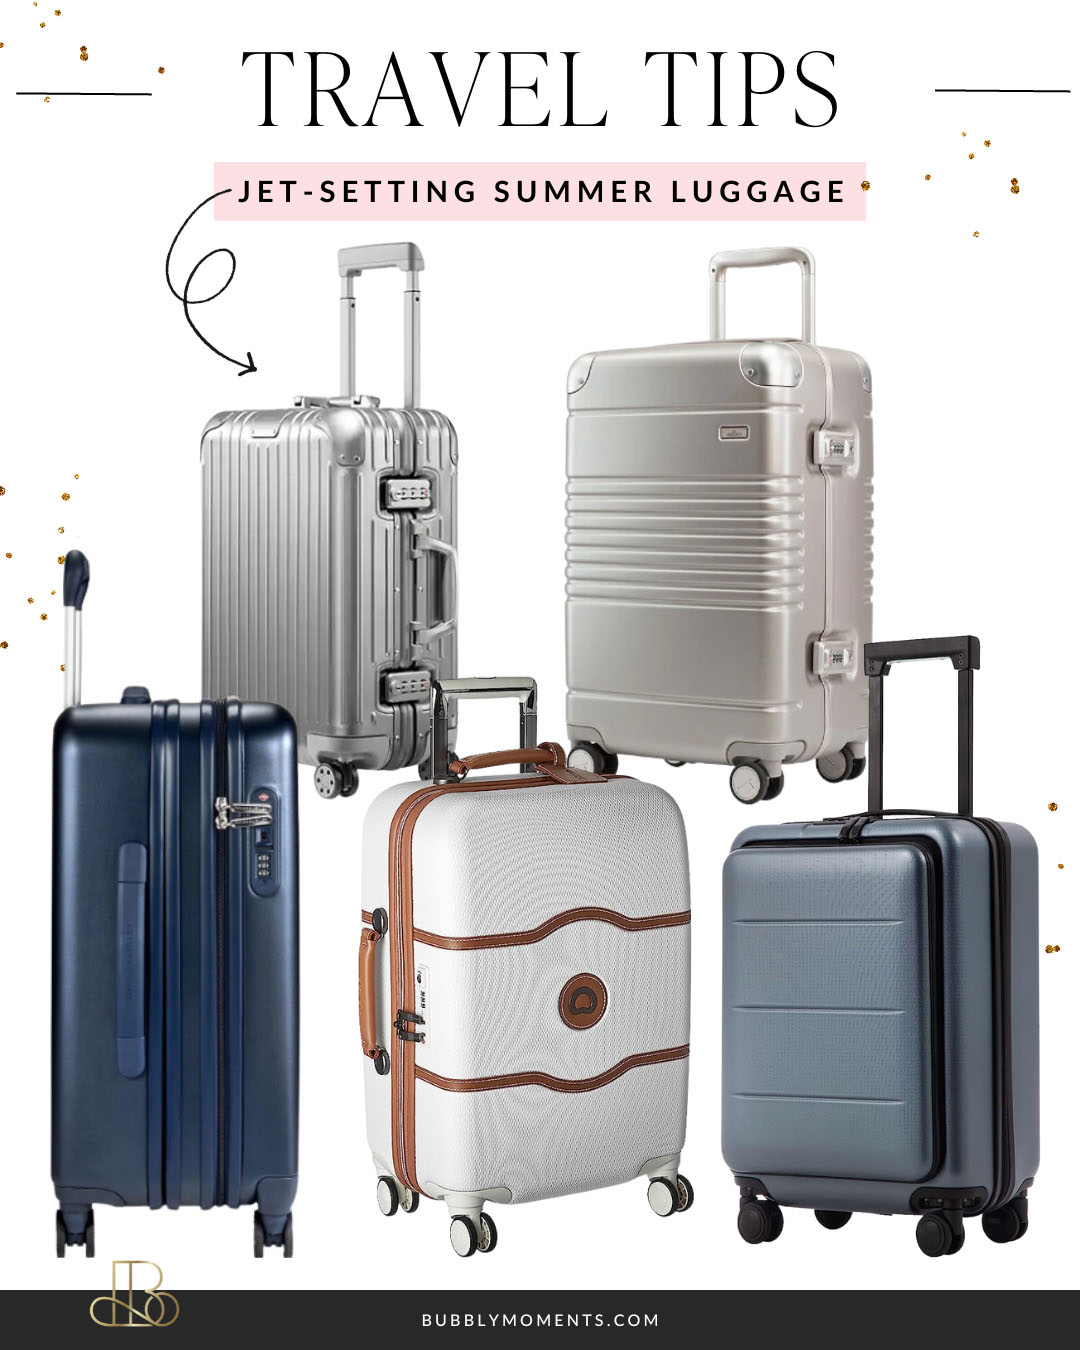 The Ultimate Jet-setting Summer Luggage Guide | Summer Excursion Luggage Guide | Jet-Setting Summer Luggage | Bubbly Moments